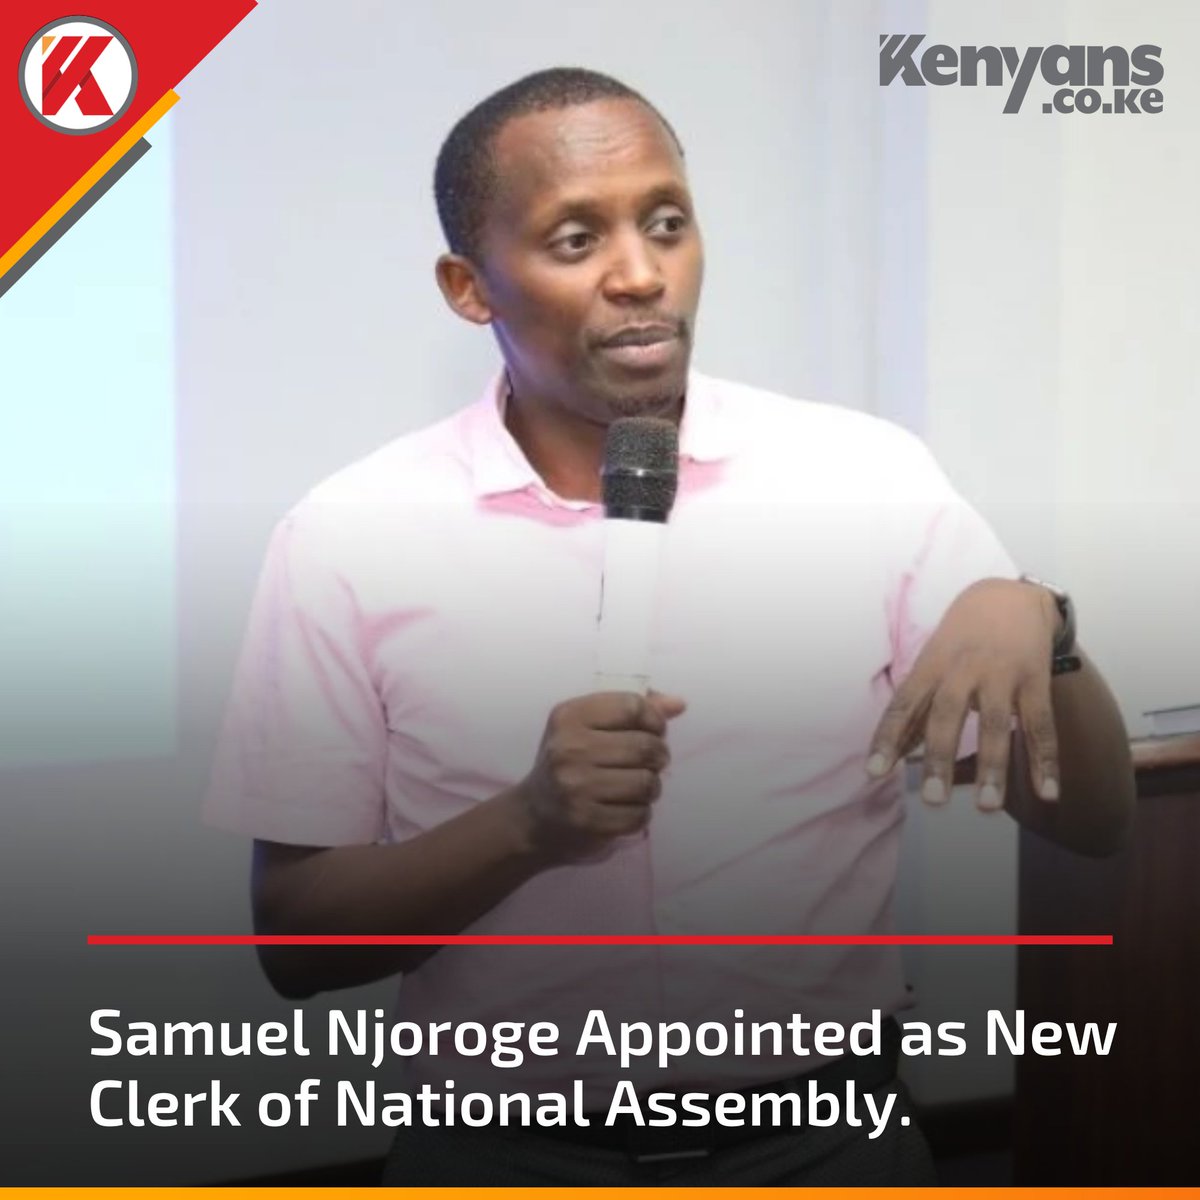 Members of the National Assembly approve the appointment of Samuel Njoroge as the new clerk